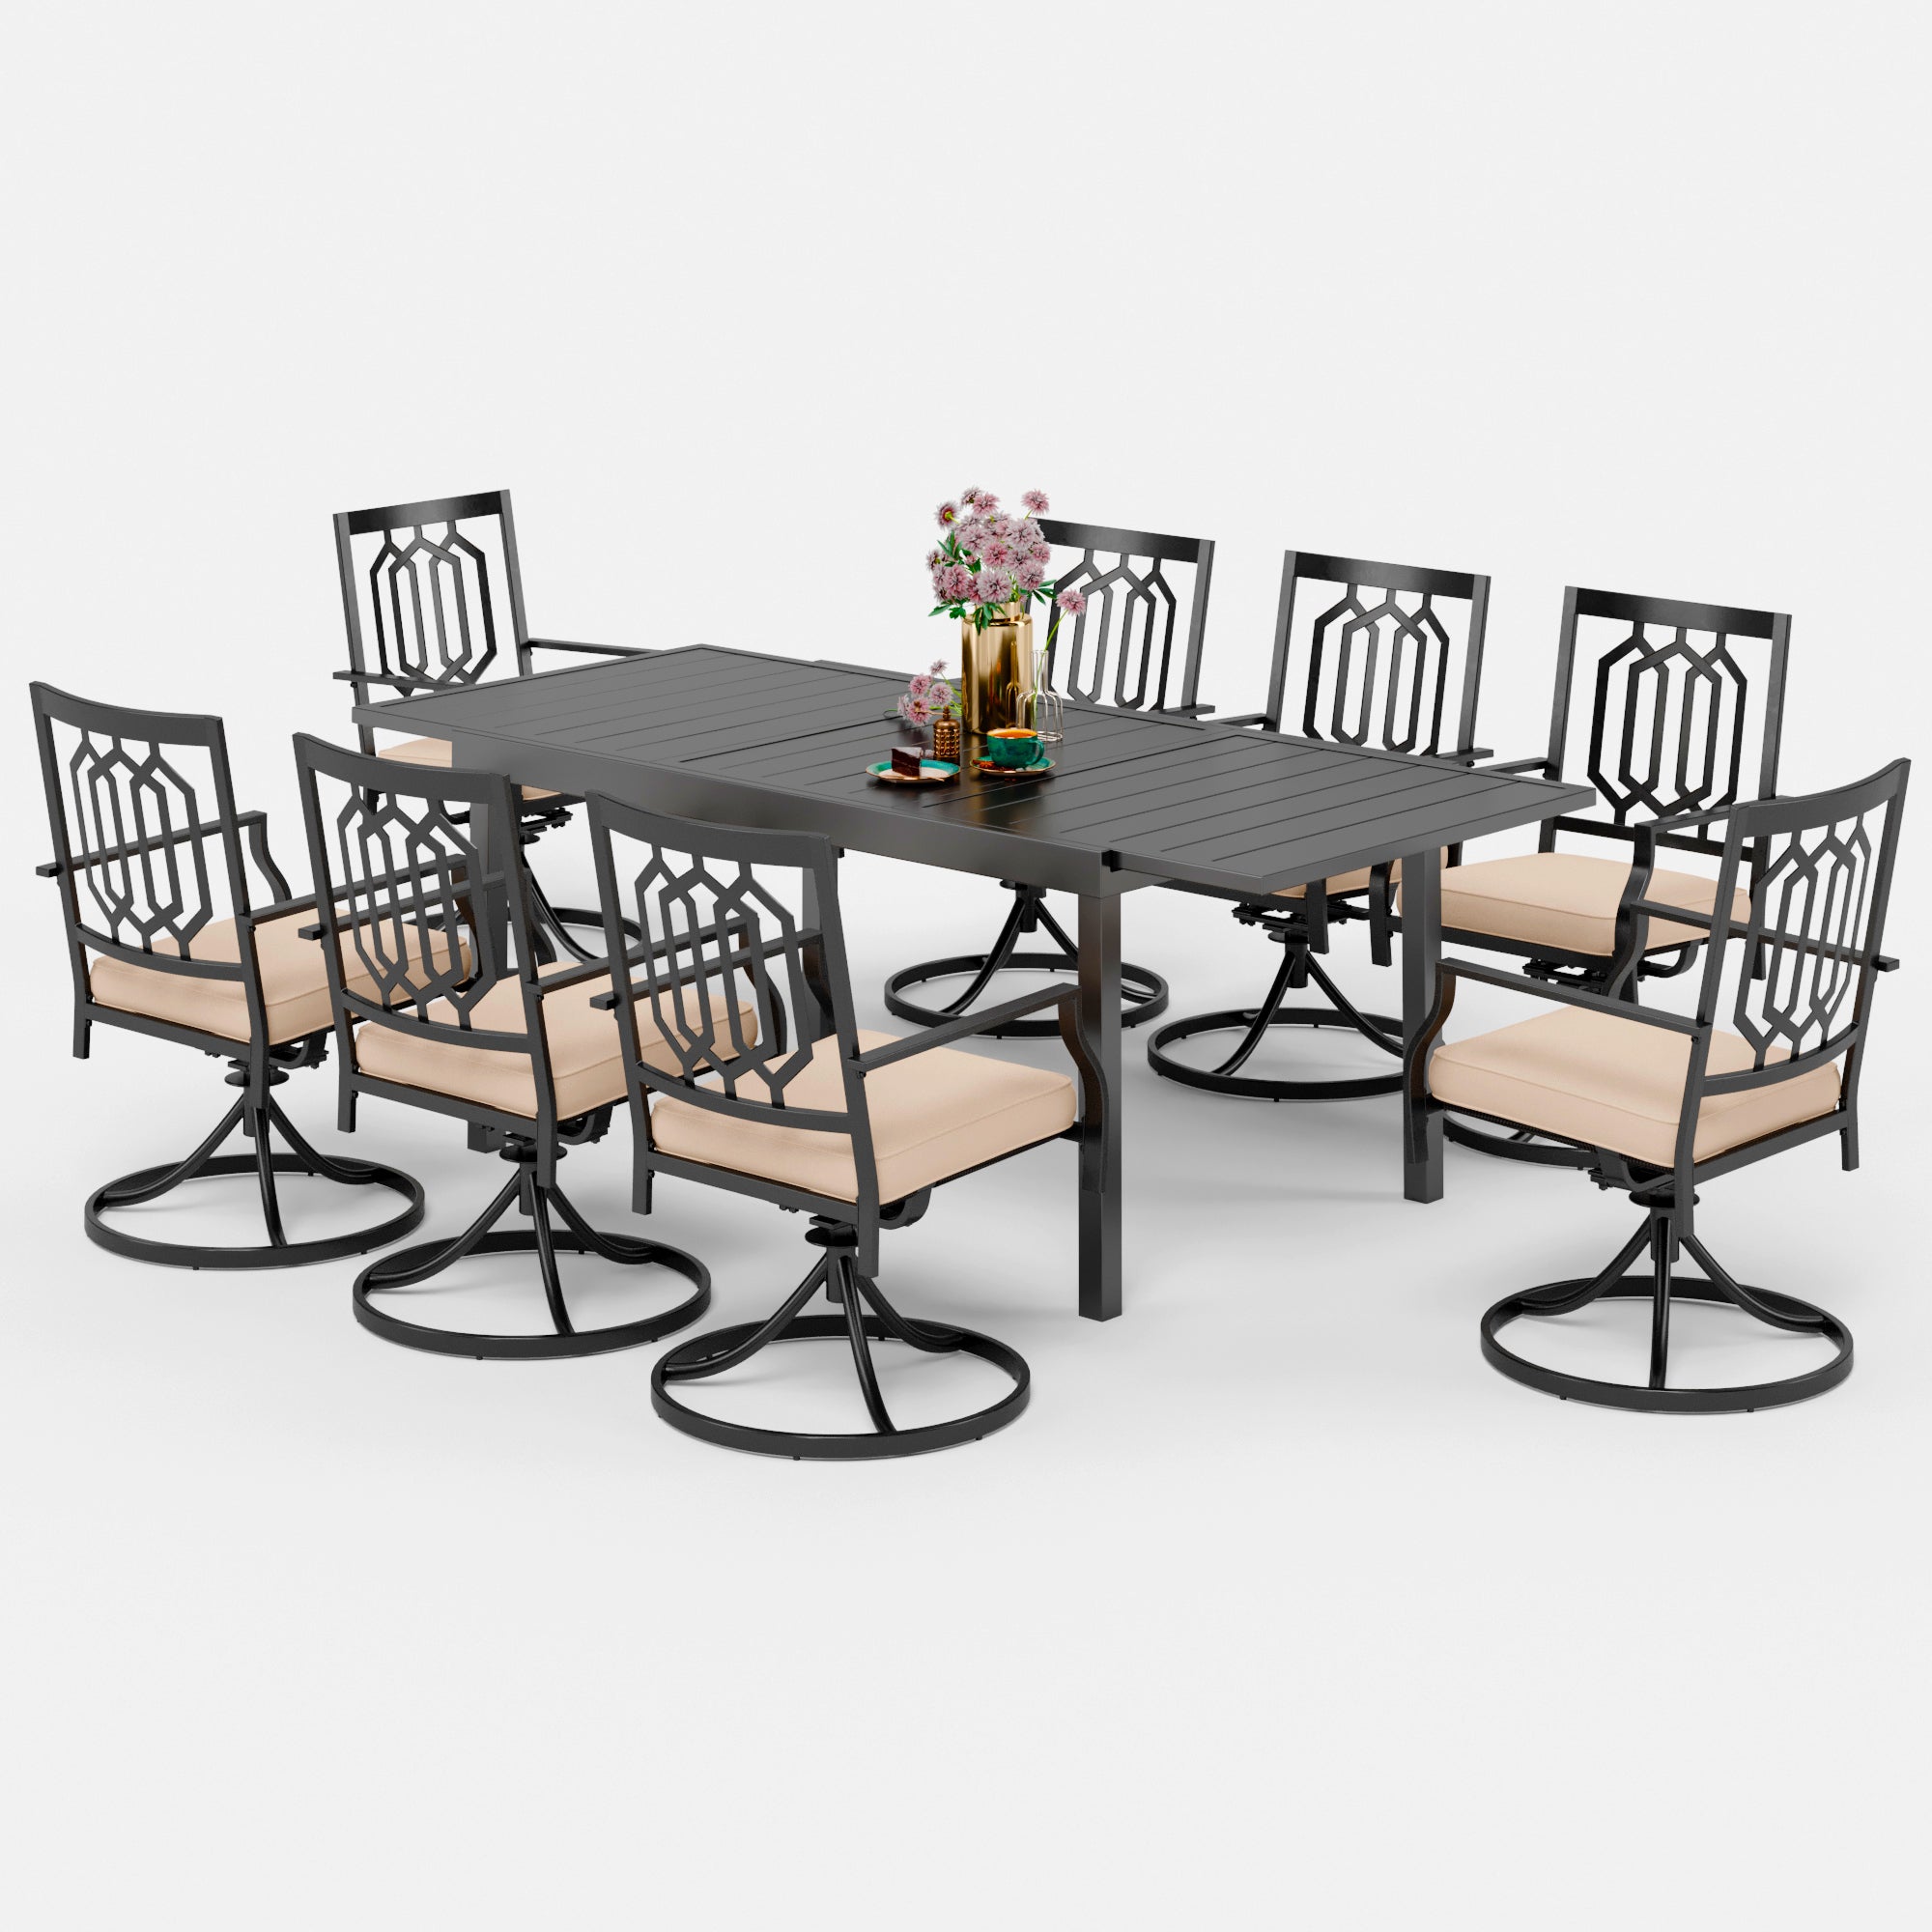 PHI VILLA Adjustable Patio Table and Cushioned Swivel Chairs Large Metal Outdoor Patio Dining Sets